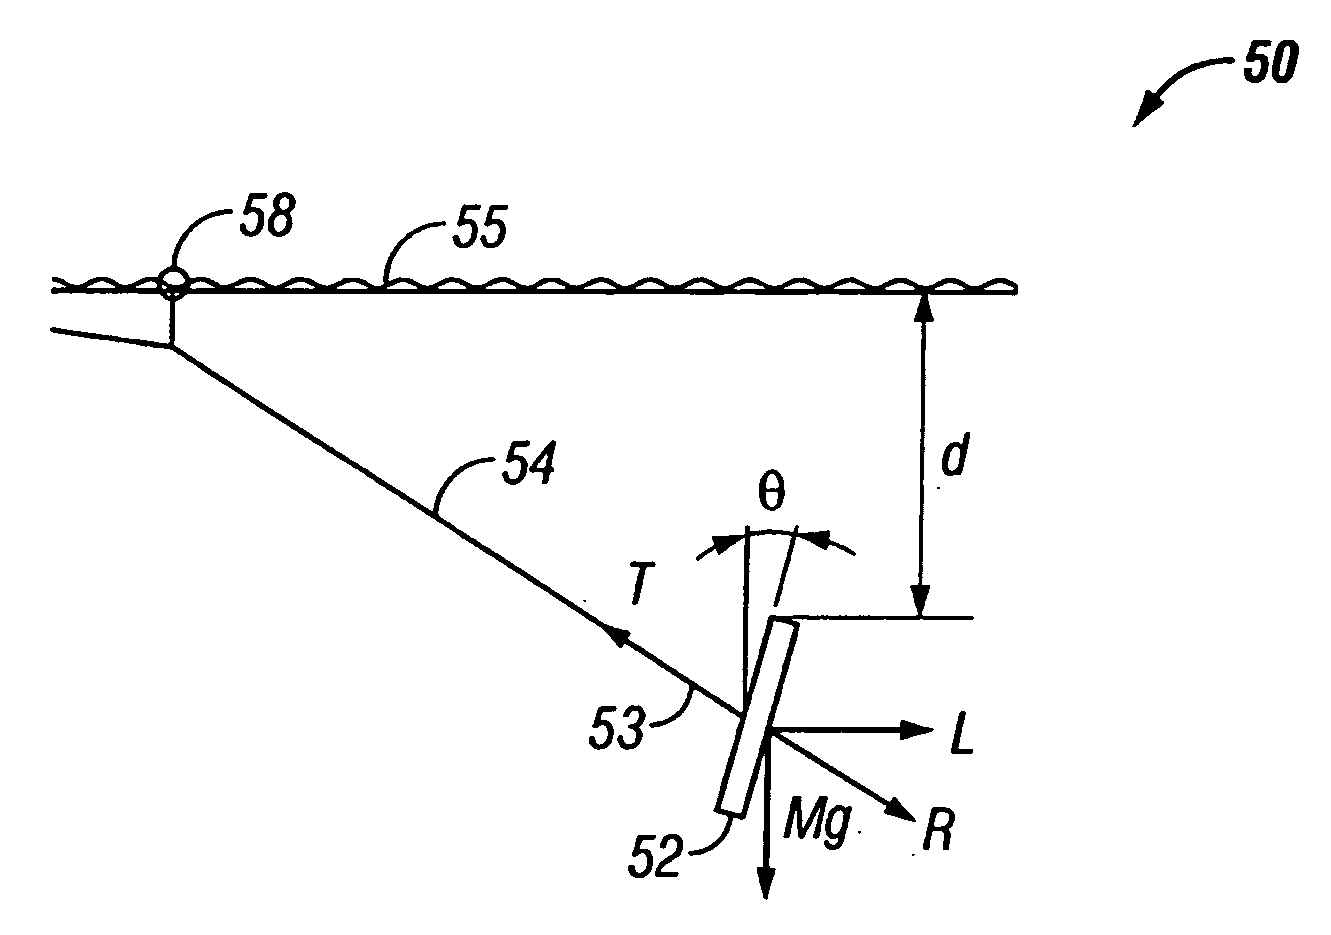 System for Depth Control of a Marine Deflector